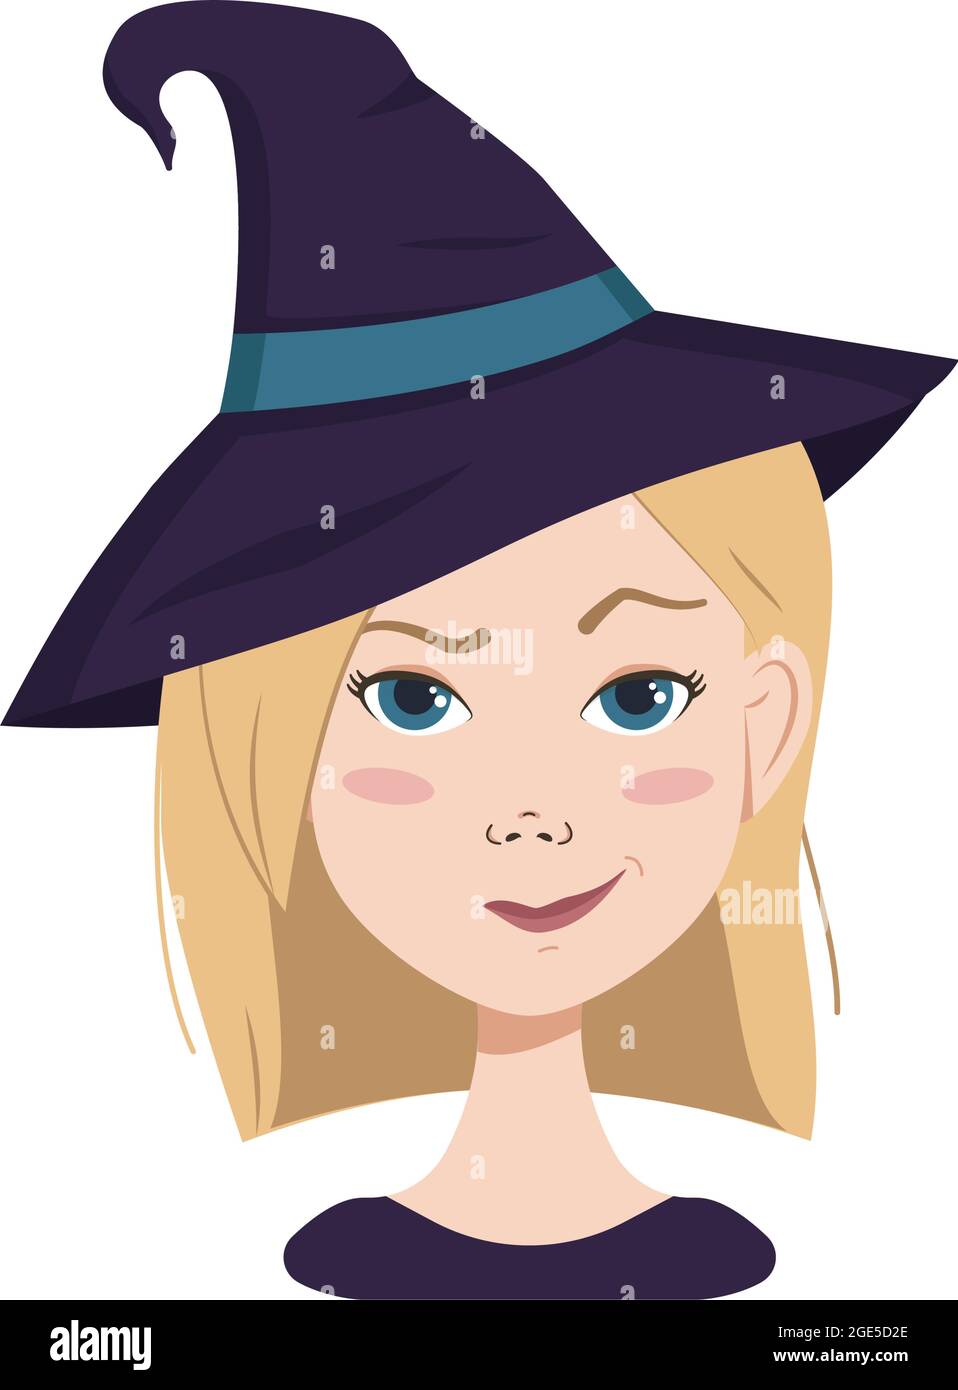 Avatar of a woman with blonde hair and blue eyes, emotions of suspicion, frowning face and pursed lips in a smirk wearing a witch hat. Girl in Halloween costume Stock Vector